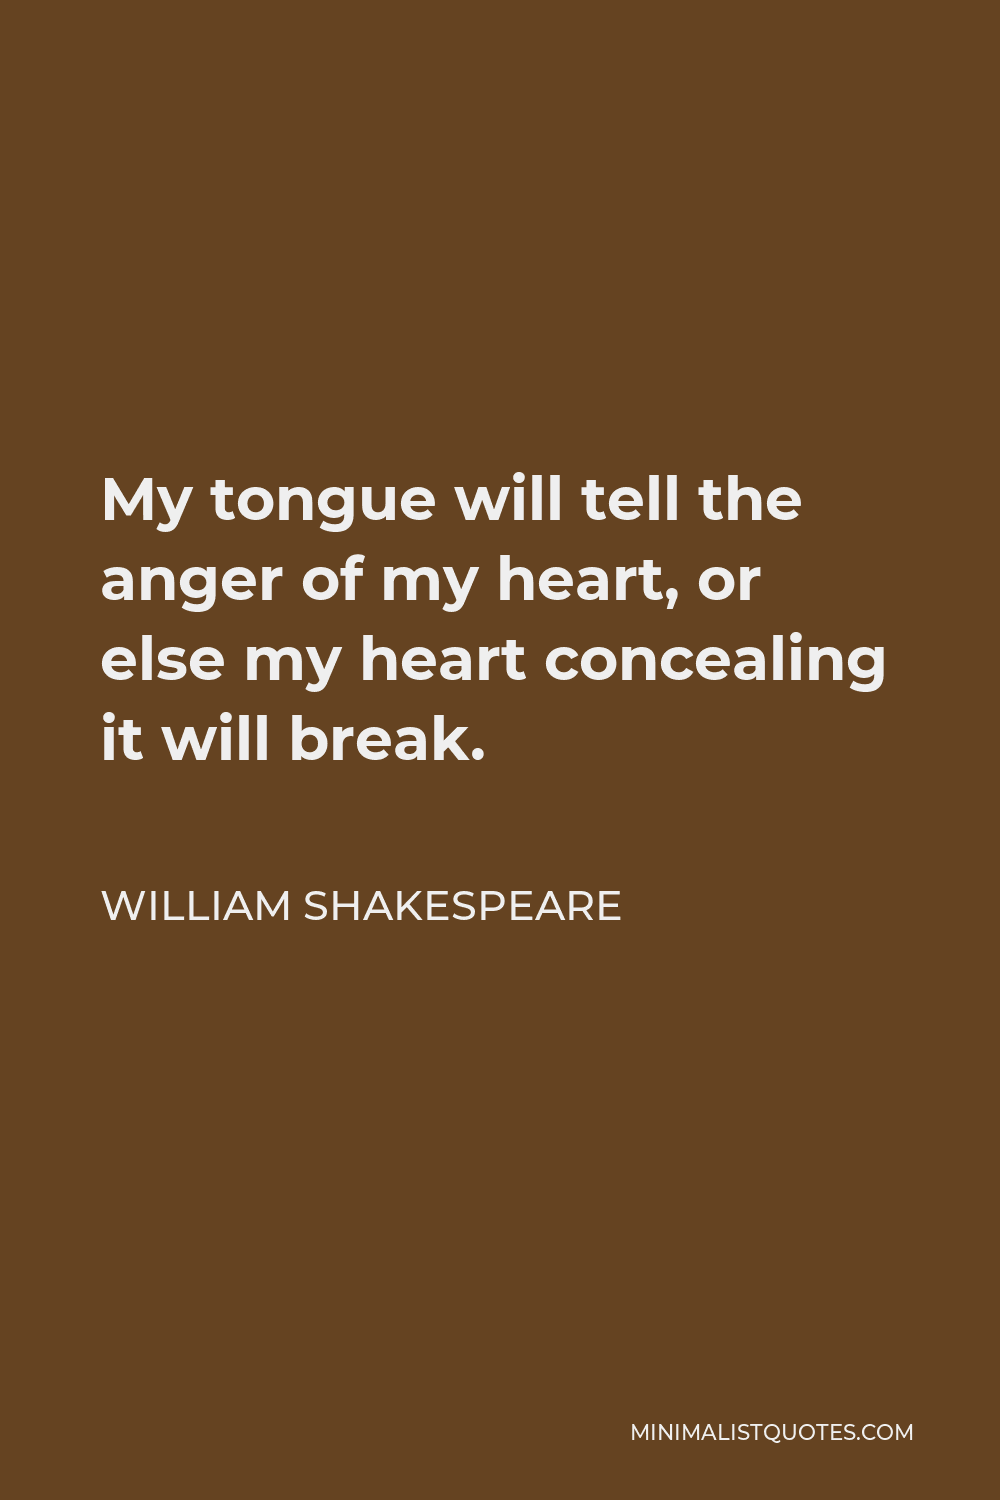 William Shakespeare Quote - My tongue will tell the anger of my heart, or else my heart concealing it will break.